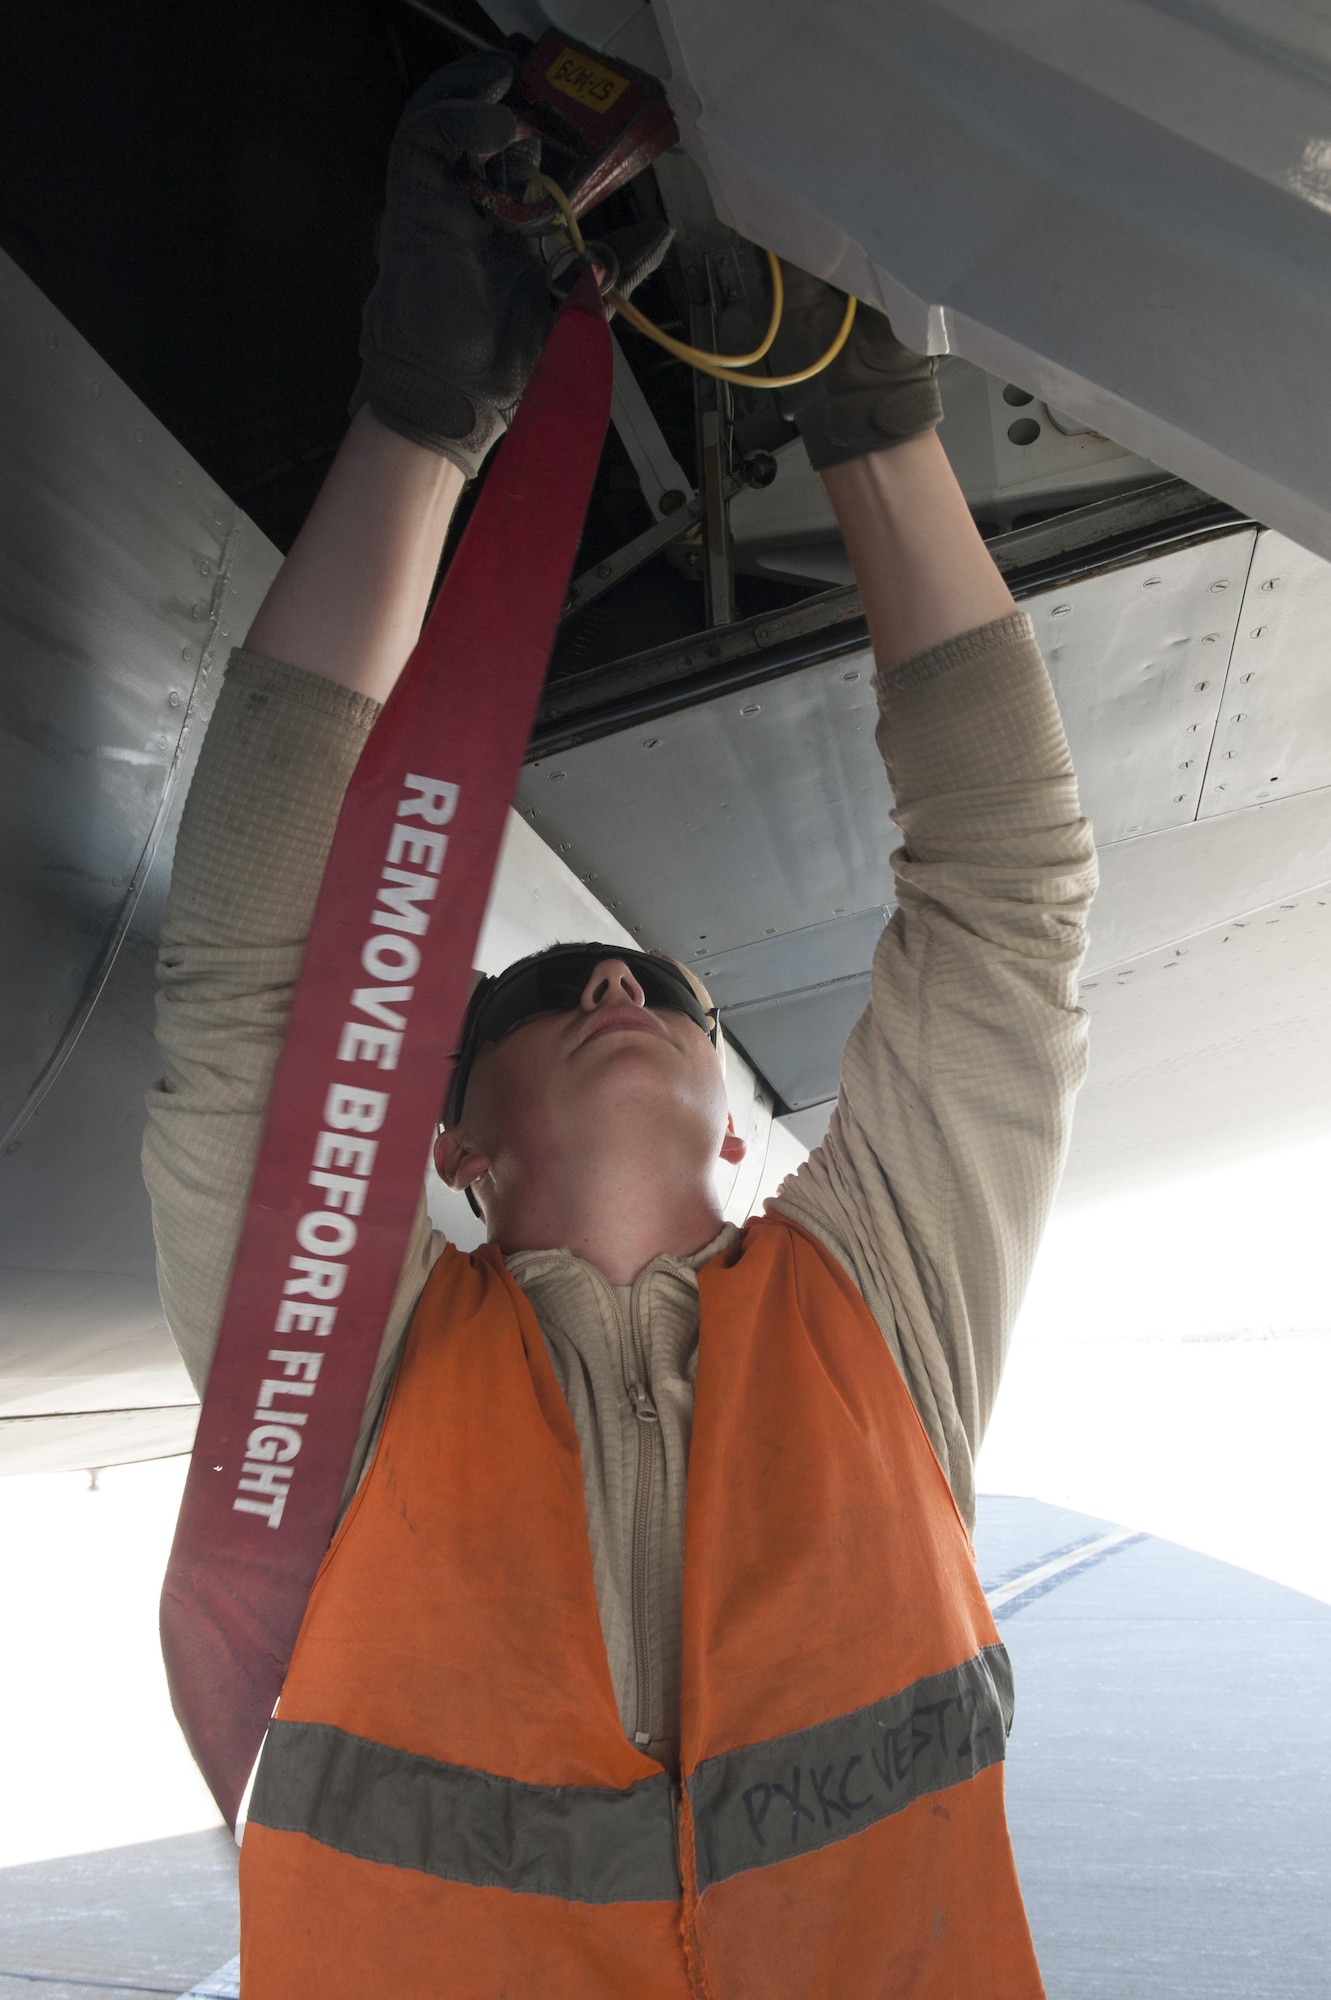 U.S. Air Force Airman 1st Class Nathaniel, 447th Expeditionary Aircraft Maintenance Squadron crew chief, places safety pins in place on a KC-135 Stratotanker Nov. 2, 2016, at Incirlik Air Base, Turkey. Safety pins are used to lock points of the aircraft in place while on ground for safety. (U.S. Air Force photo by Staff Sgt. Jack Sanders)